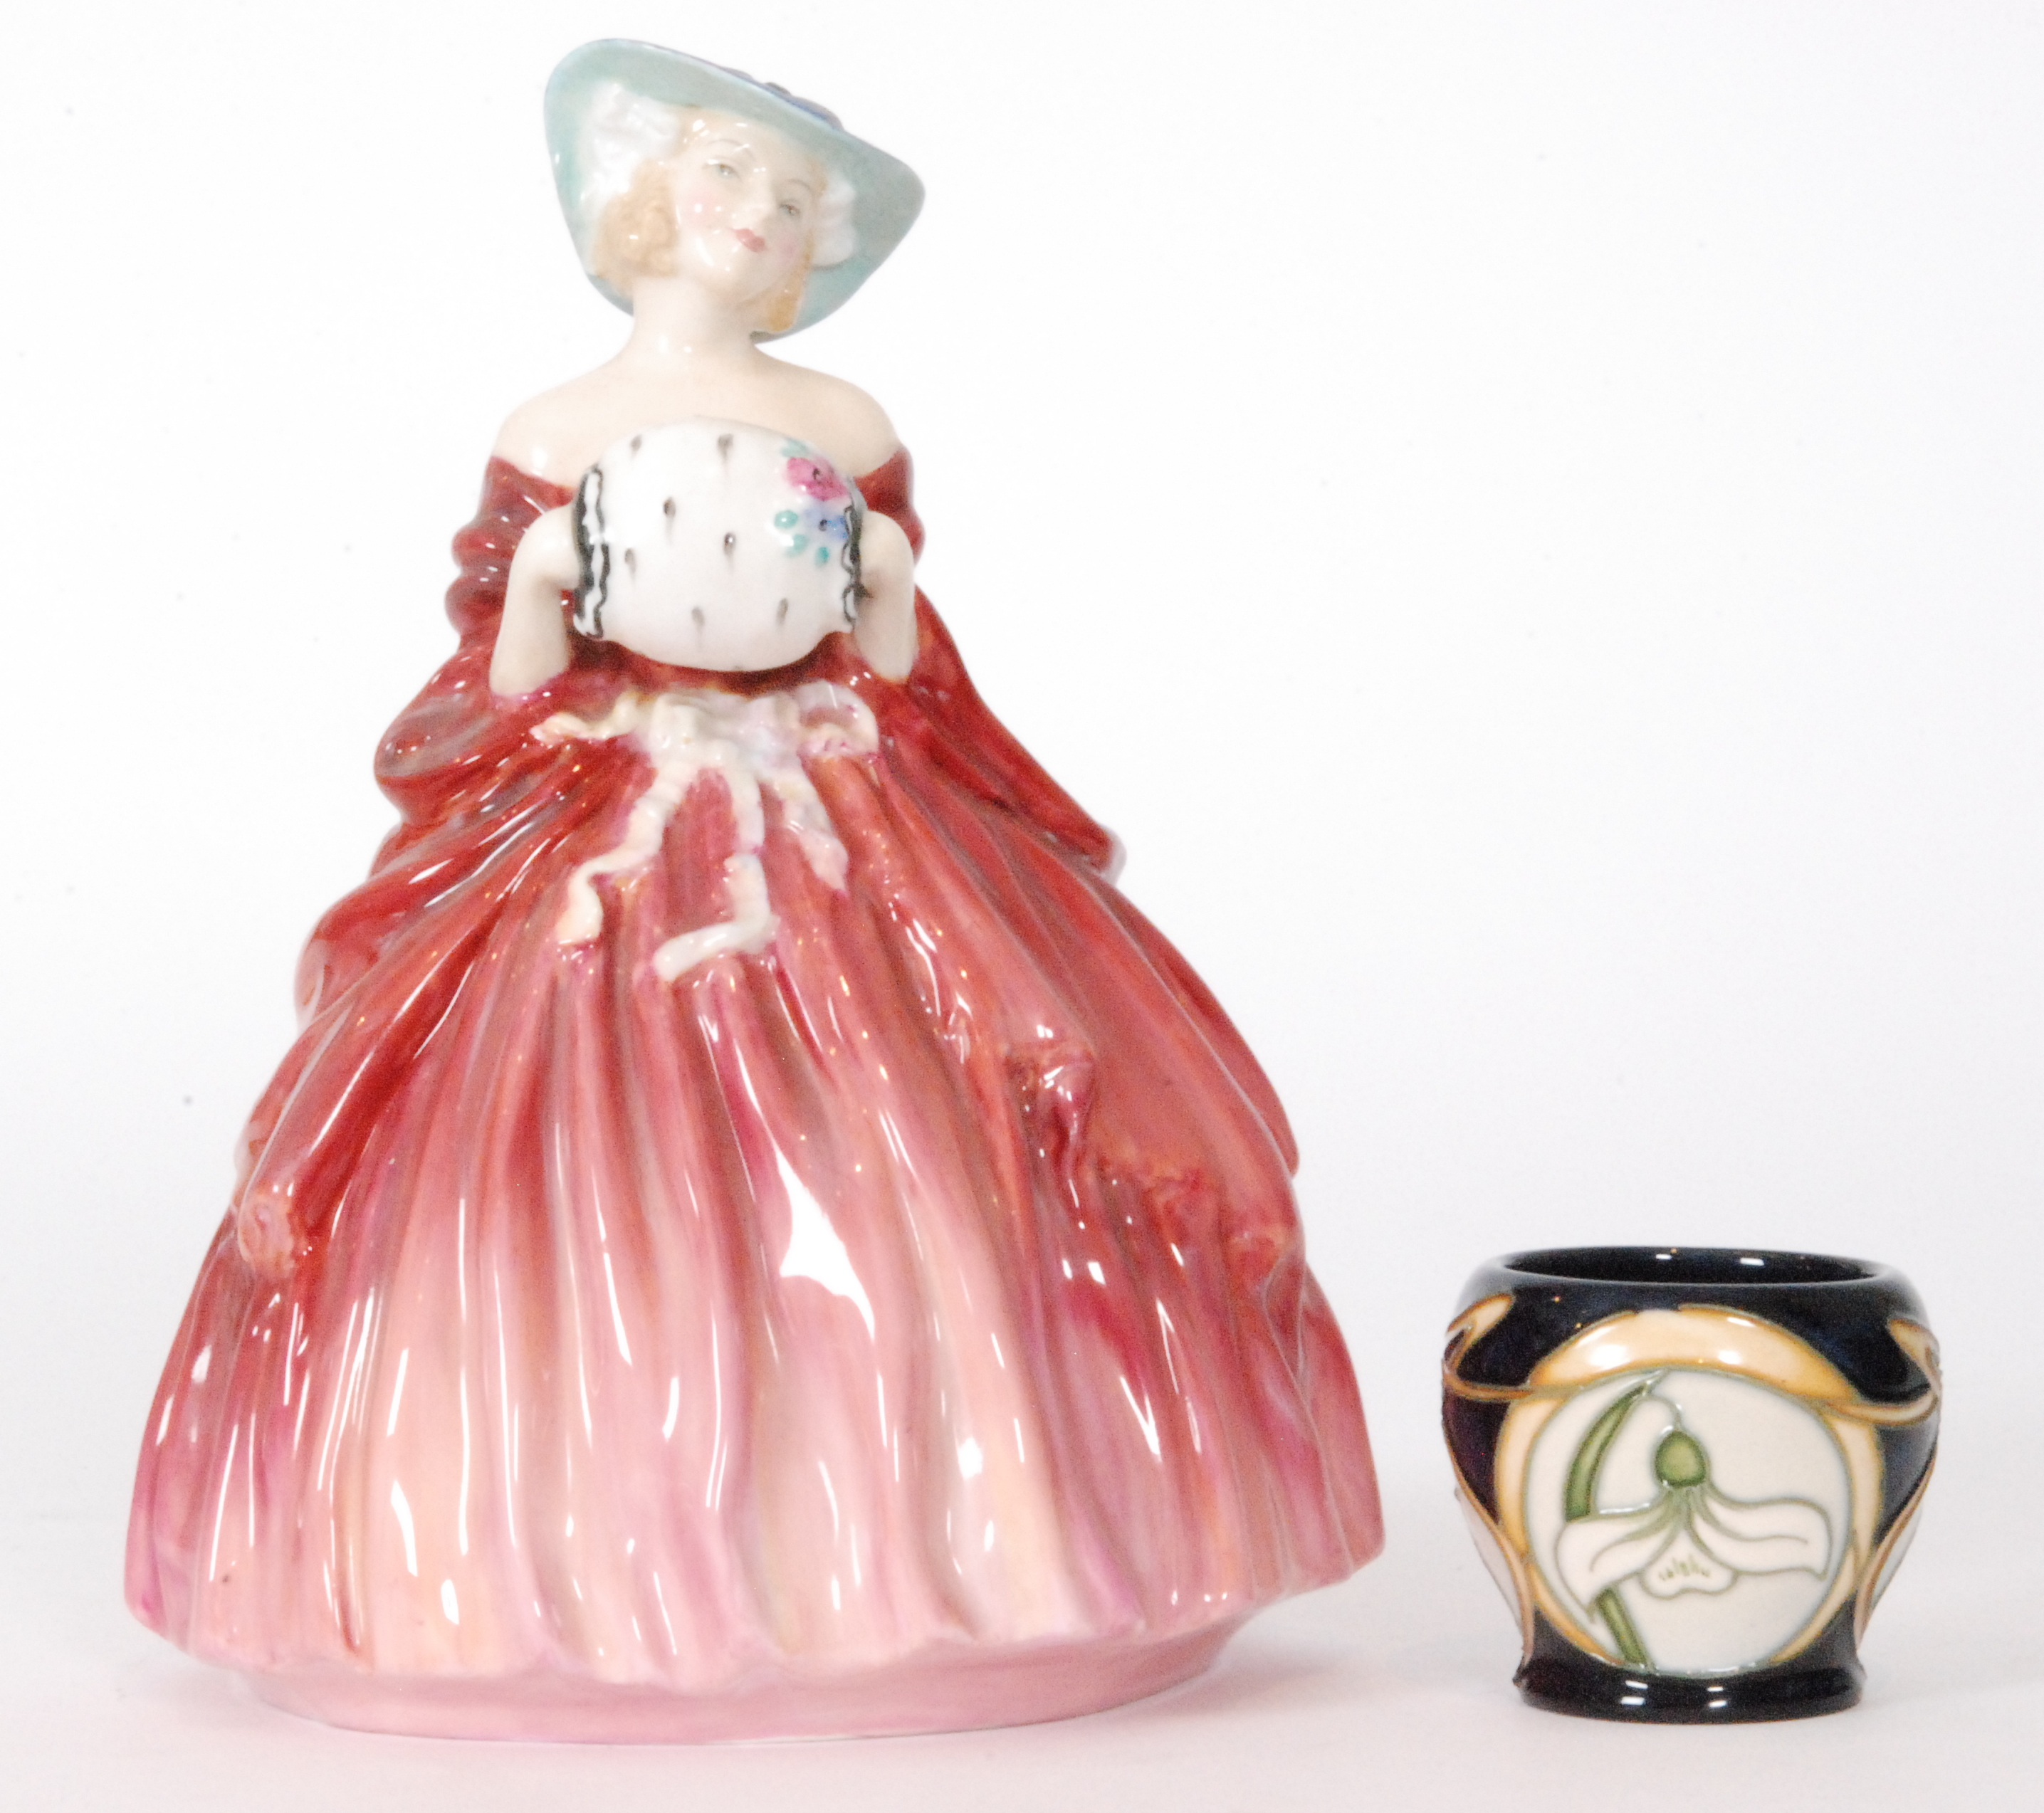 A Royal Doulton figurine Genevieve HN1962 and a Moorcroft Pottery eggcup decorated in the Parisian